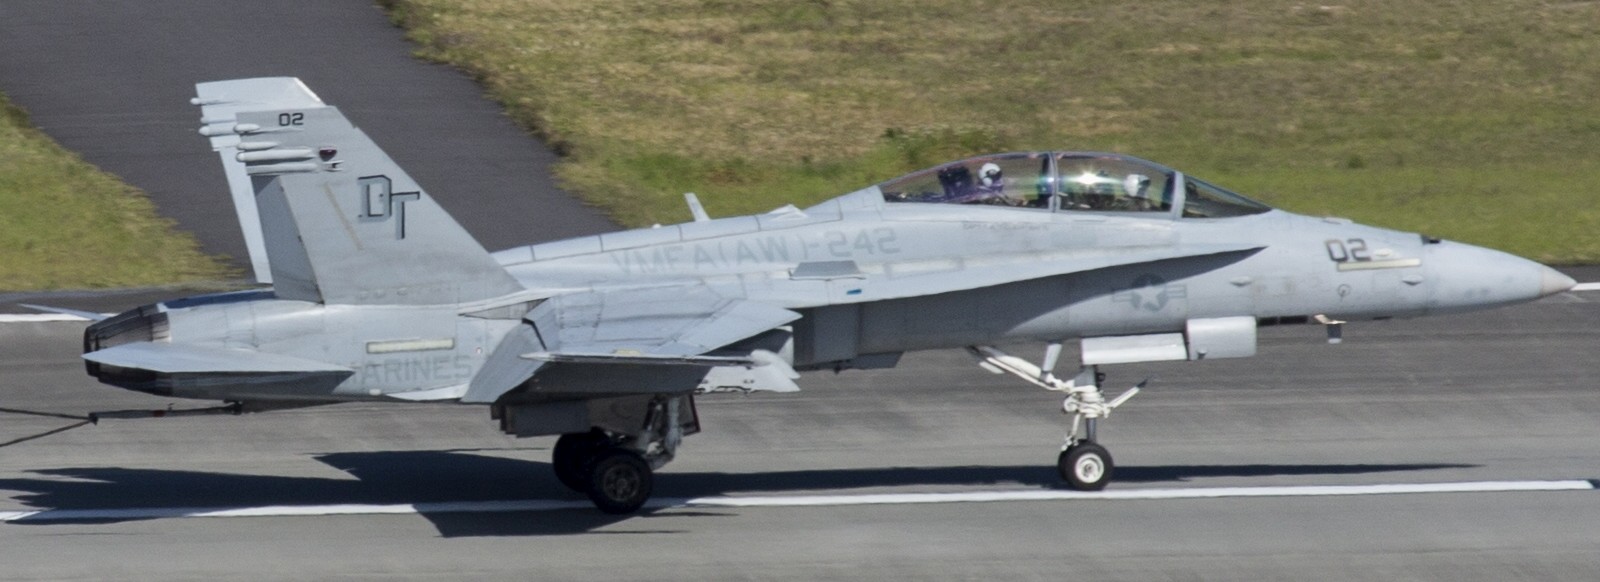 vmfa(aw)-242 bats marine all-weather fighter attack squadron usmc f/a-18d hornet 76